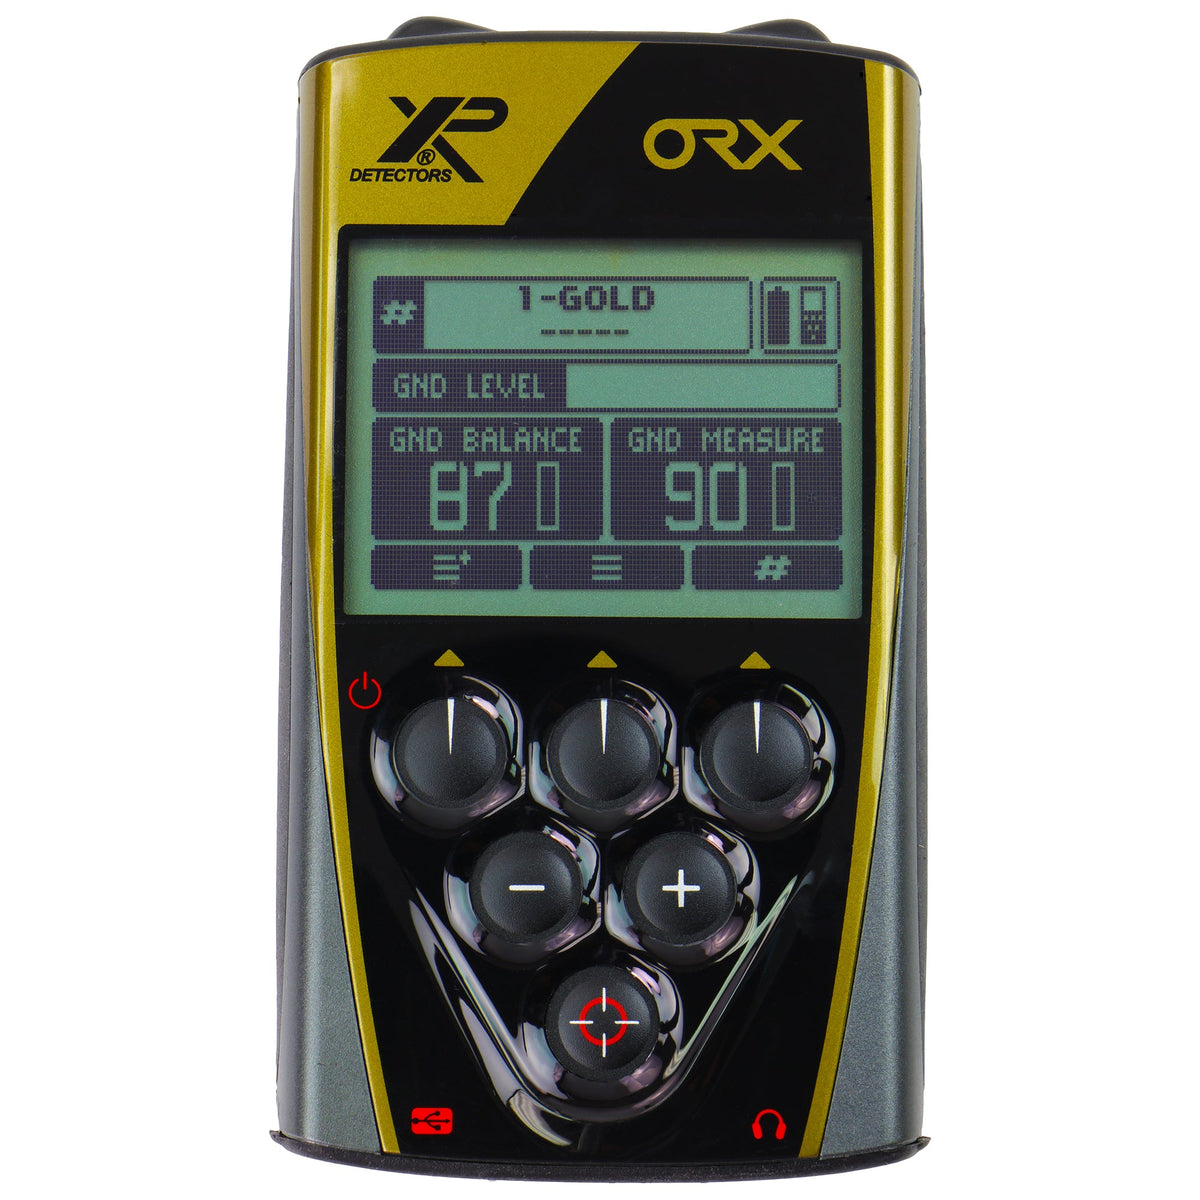 XP ORX Metal Detector Wireless Metal Detector with 9